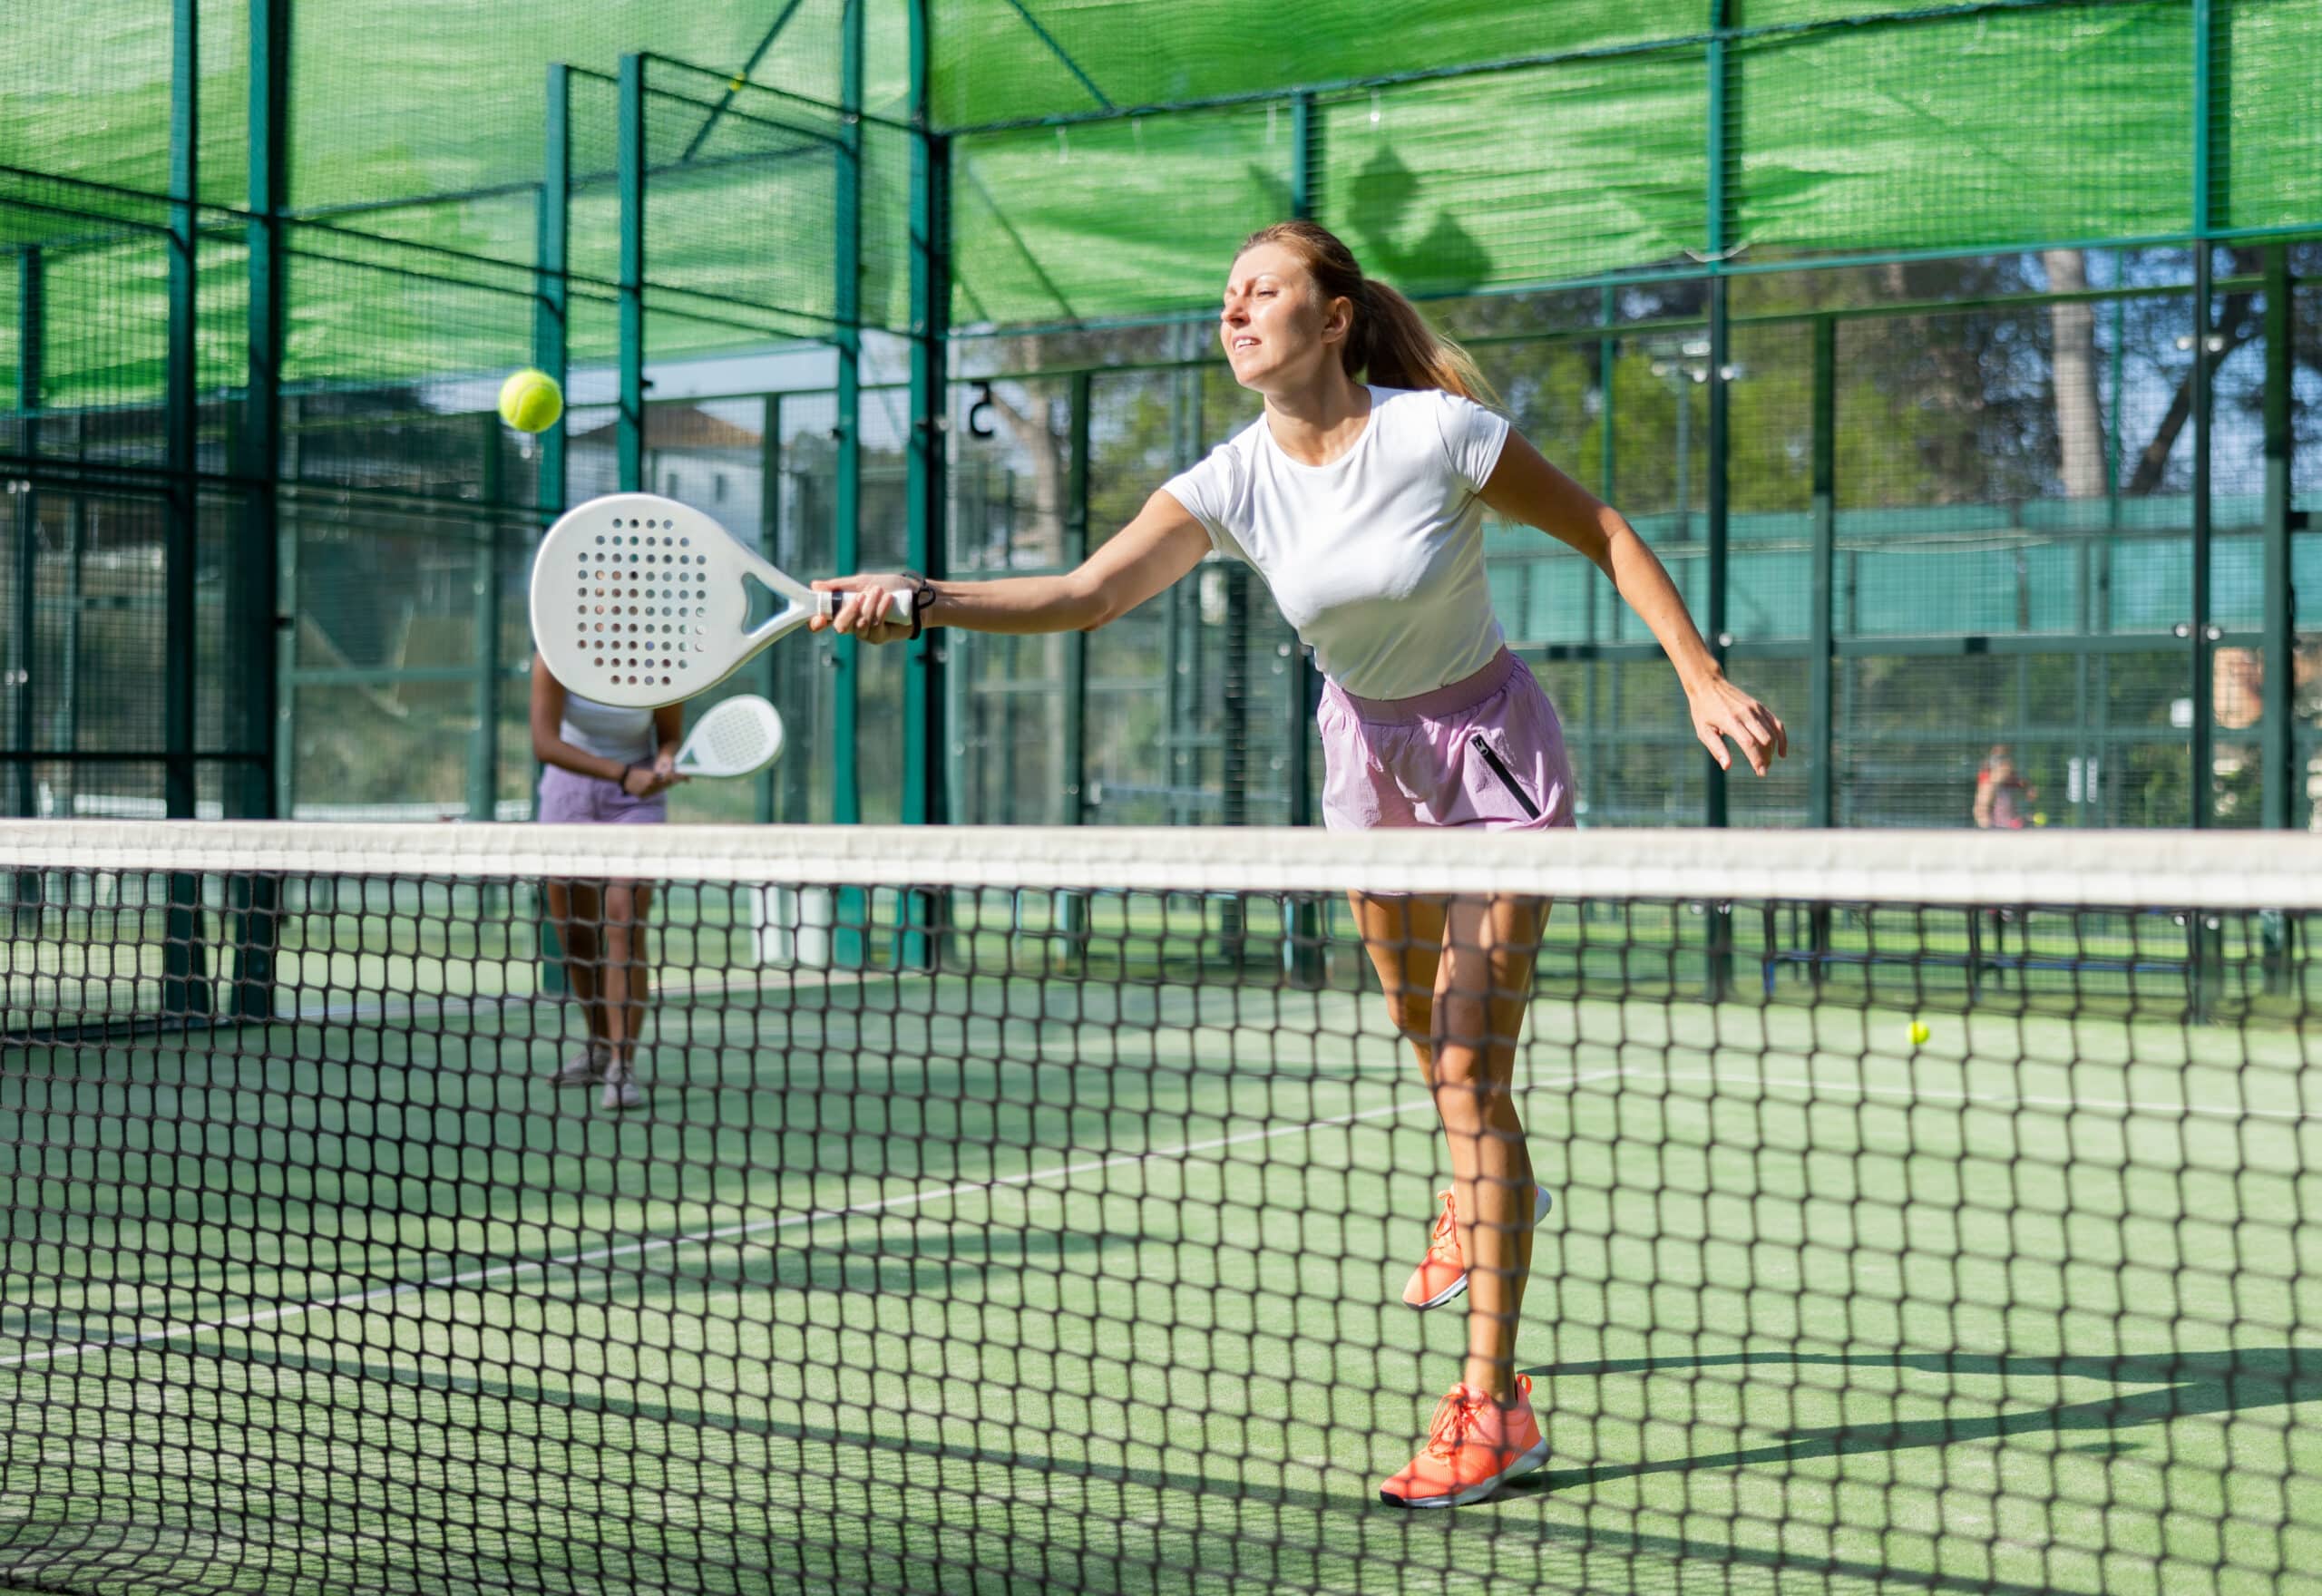 Active womans with enthusiasm playing padel on tennis court